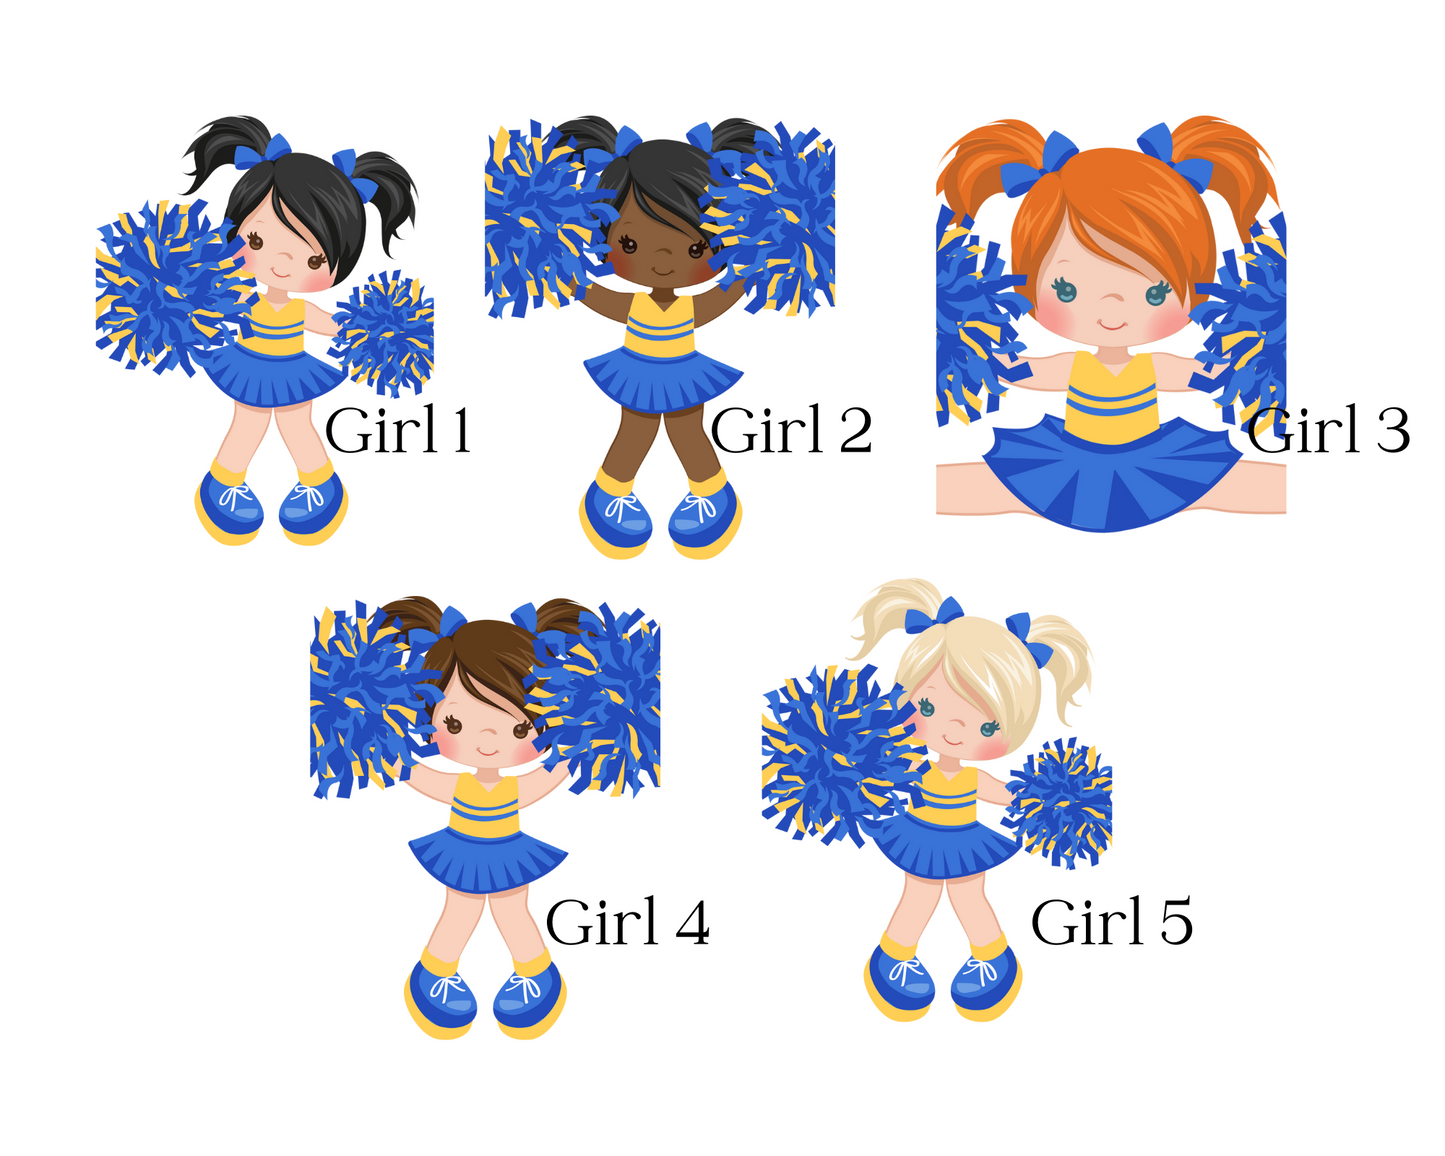 Cheerleader Personalized Puzzle - Your Choice of Team Colors!